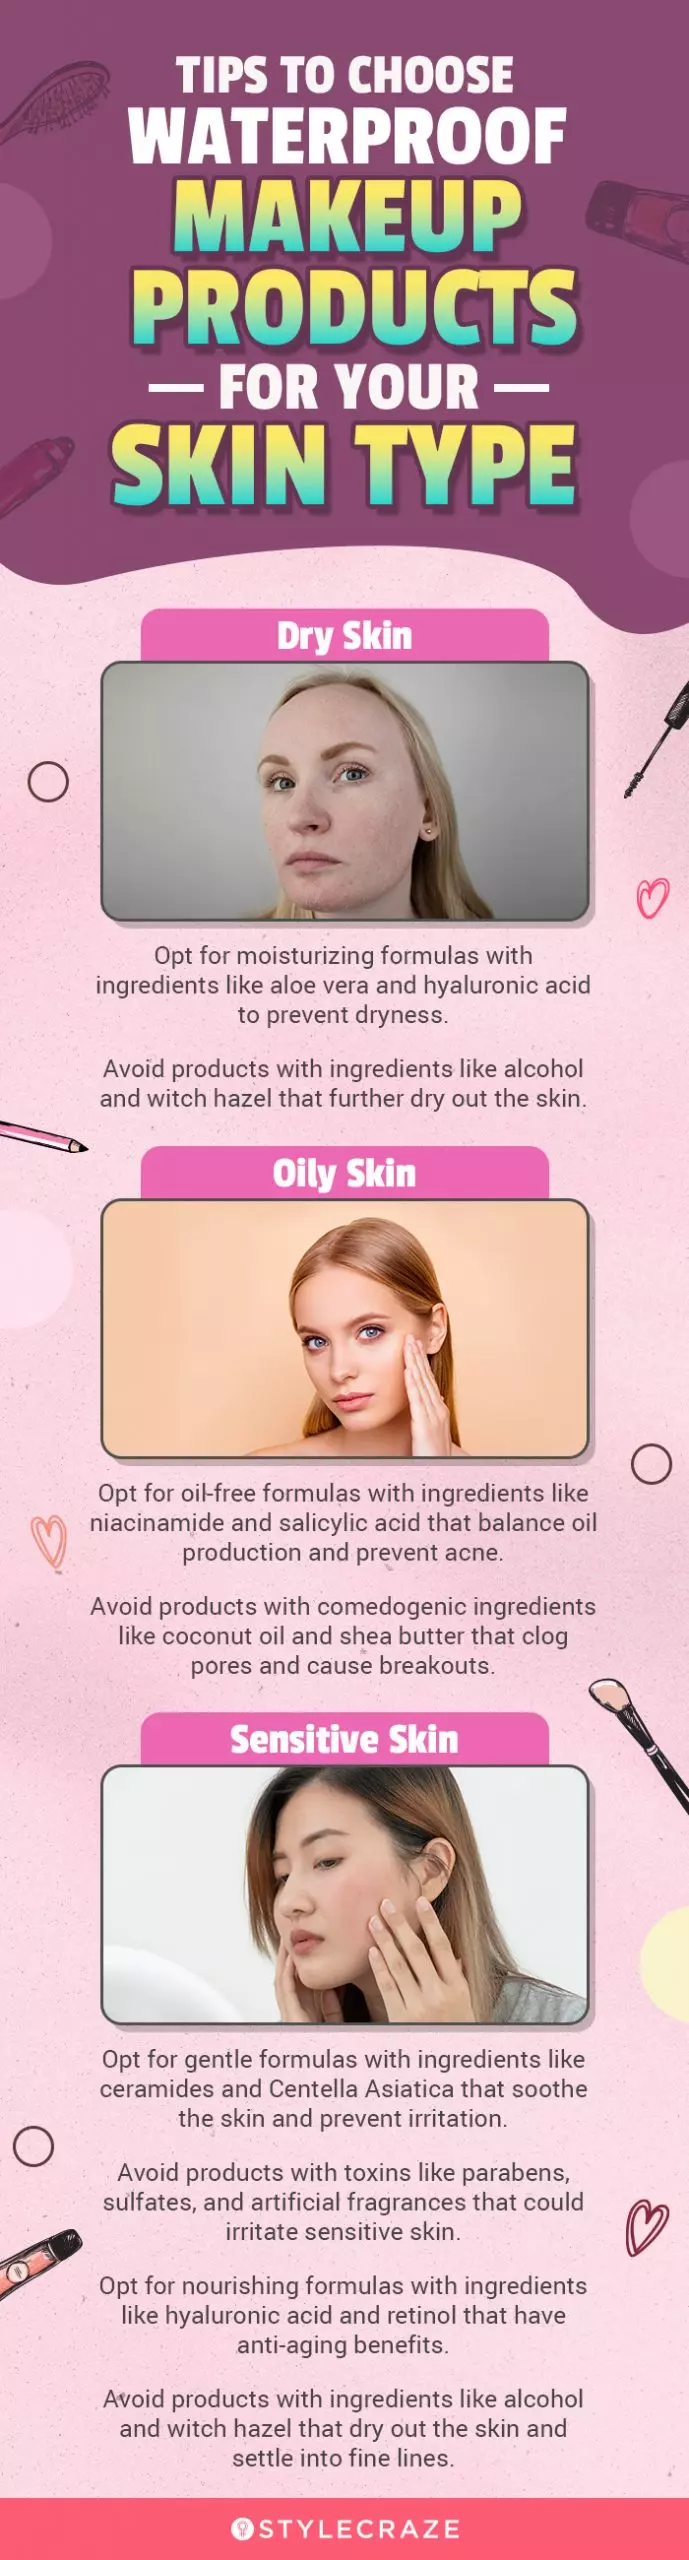 Tips To Choose Waterproof Makeup Products For Your Skin Type (infographic)